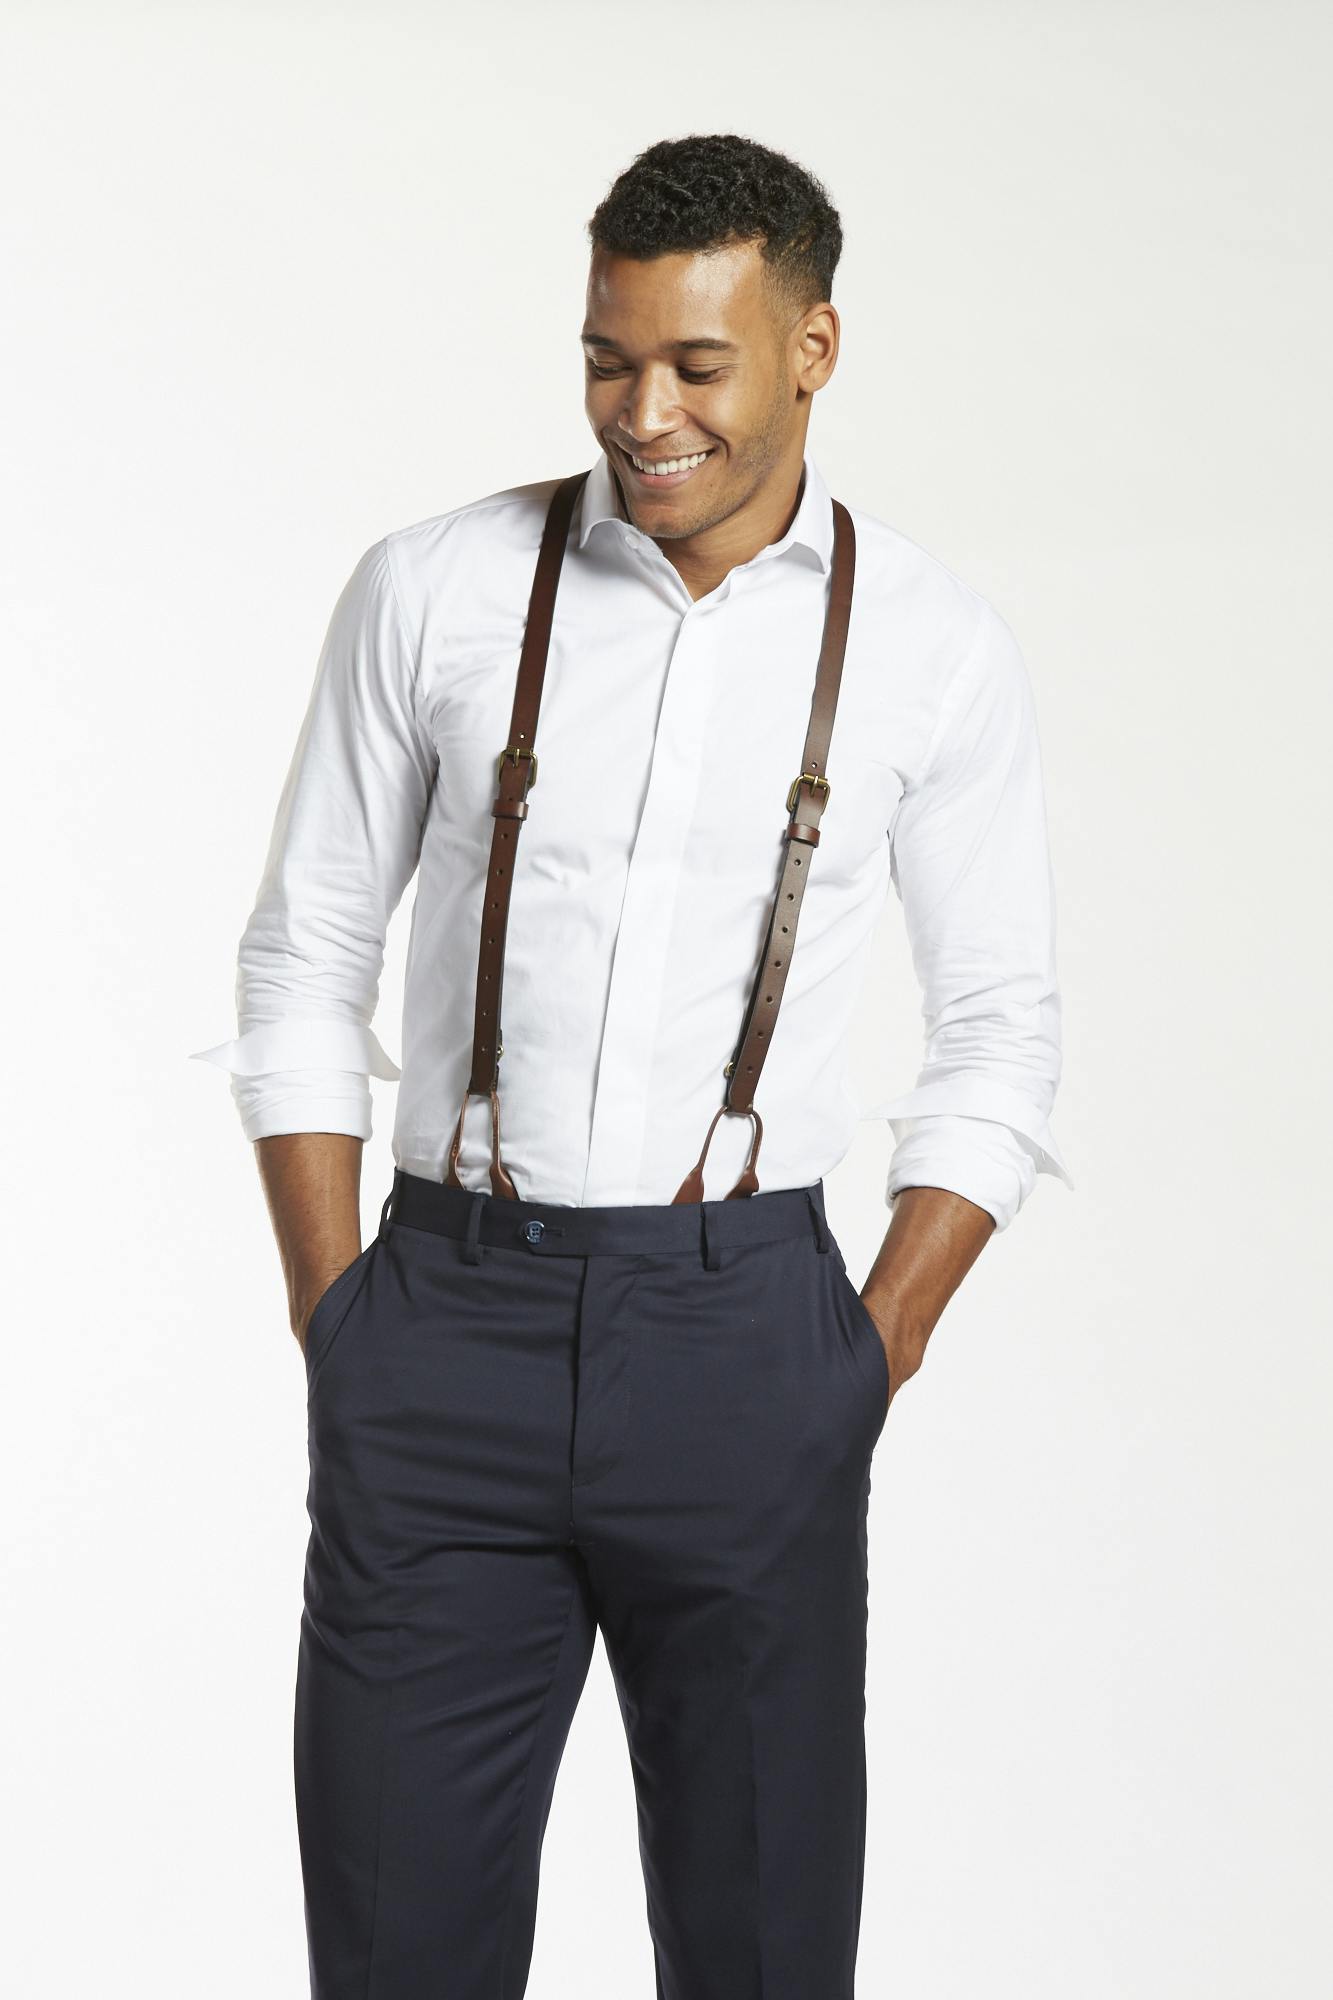 Can You Wear Suspenders with a Graphic T-Shirt?